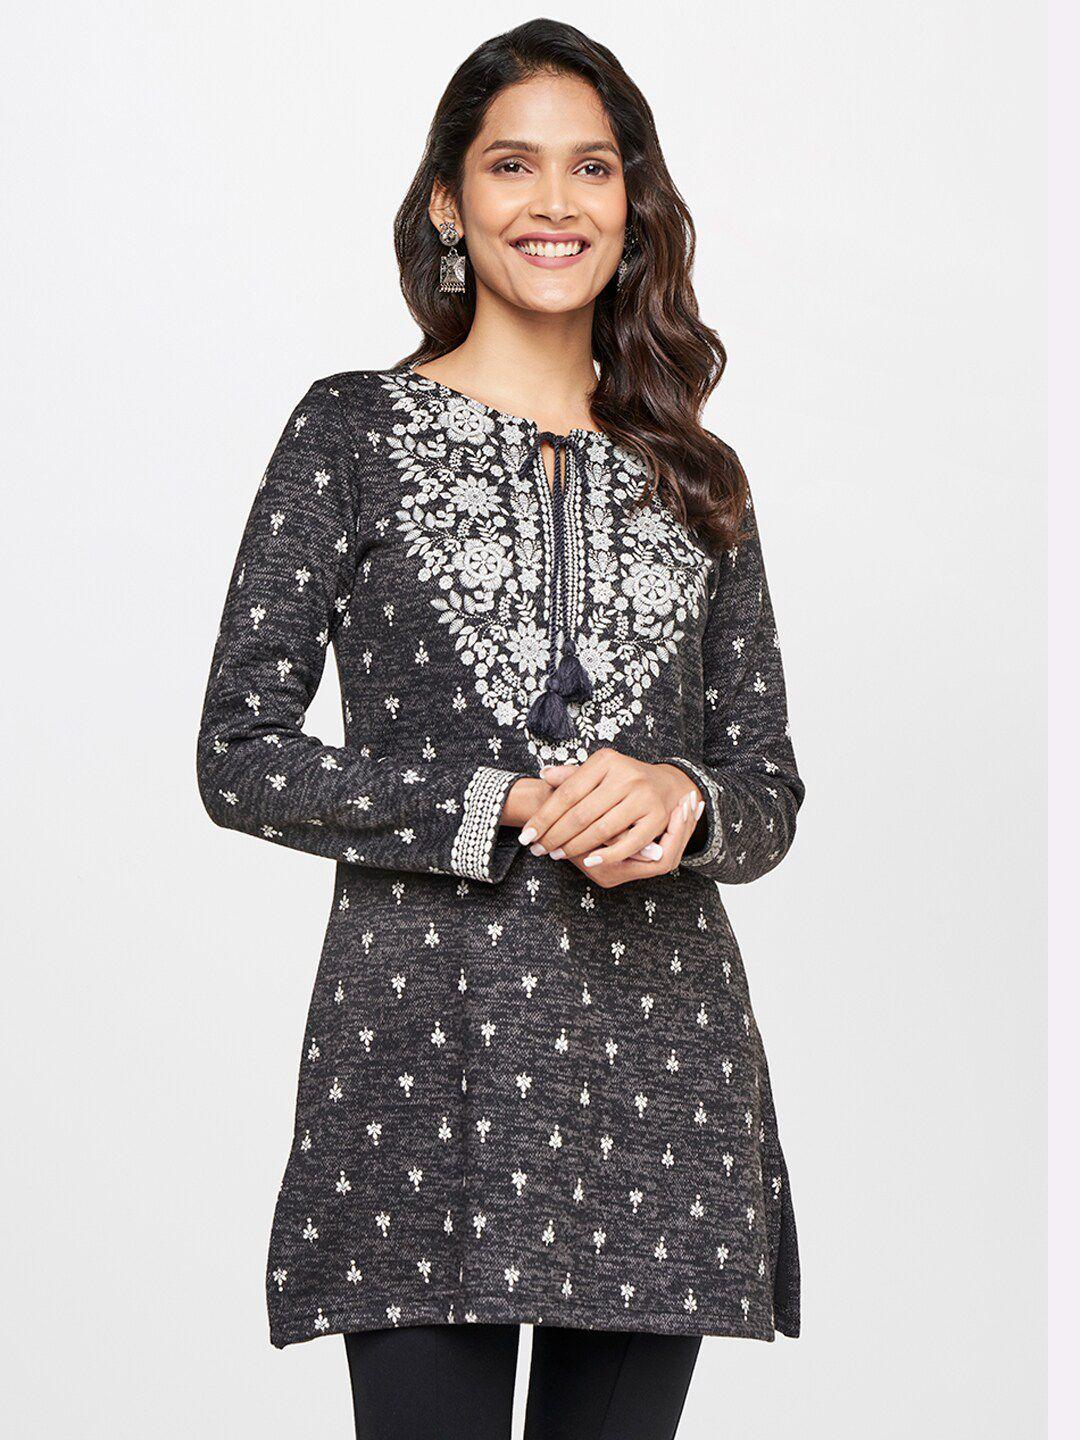 itse-black-&-grey-embroidered-tunic